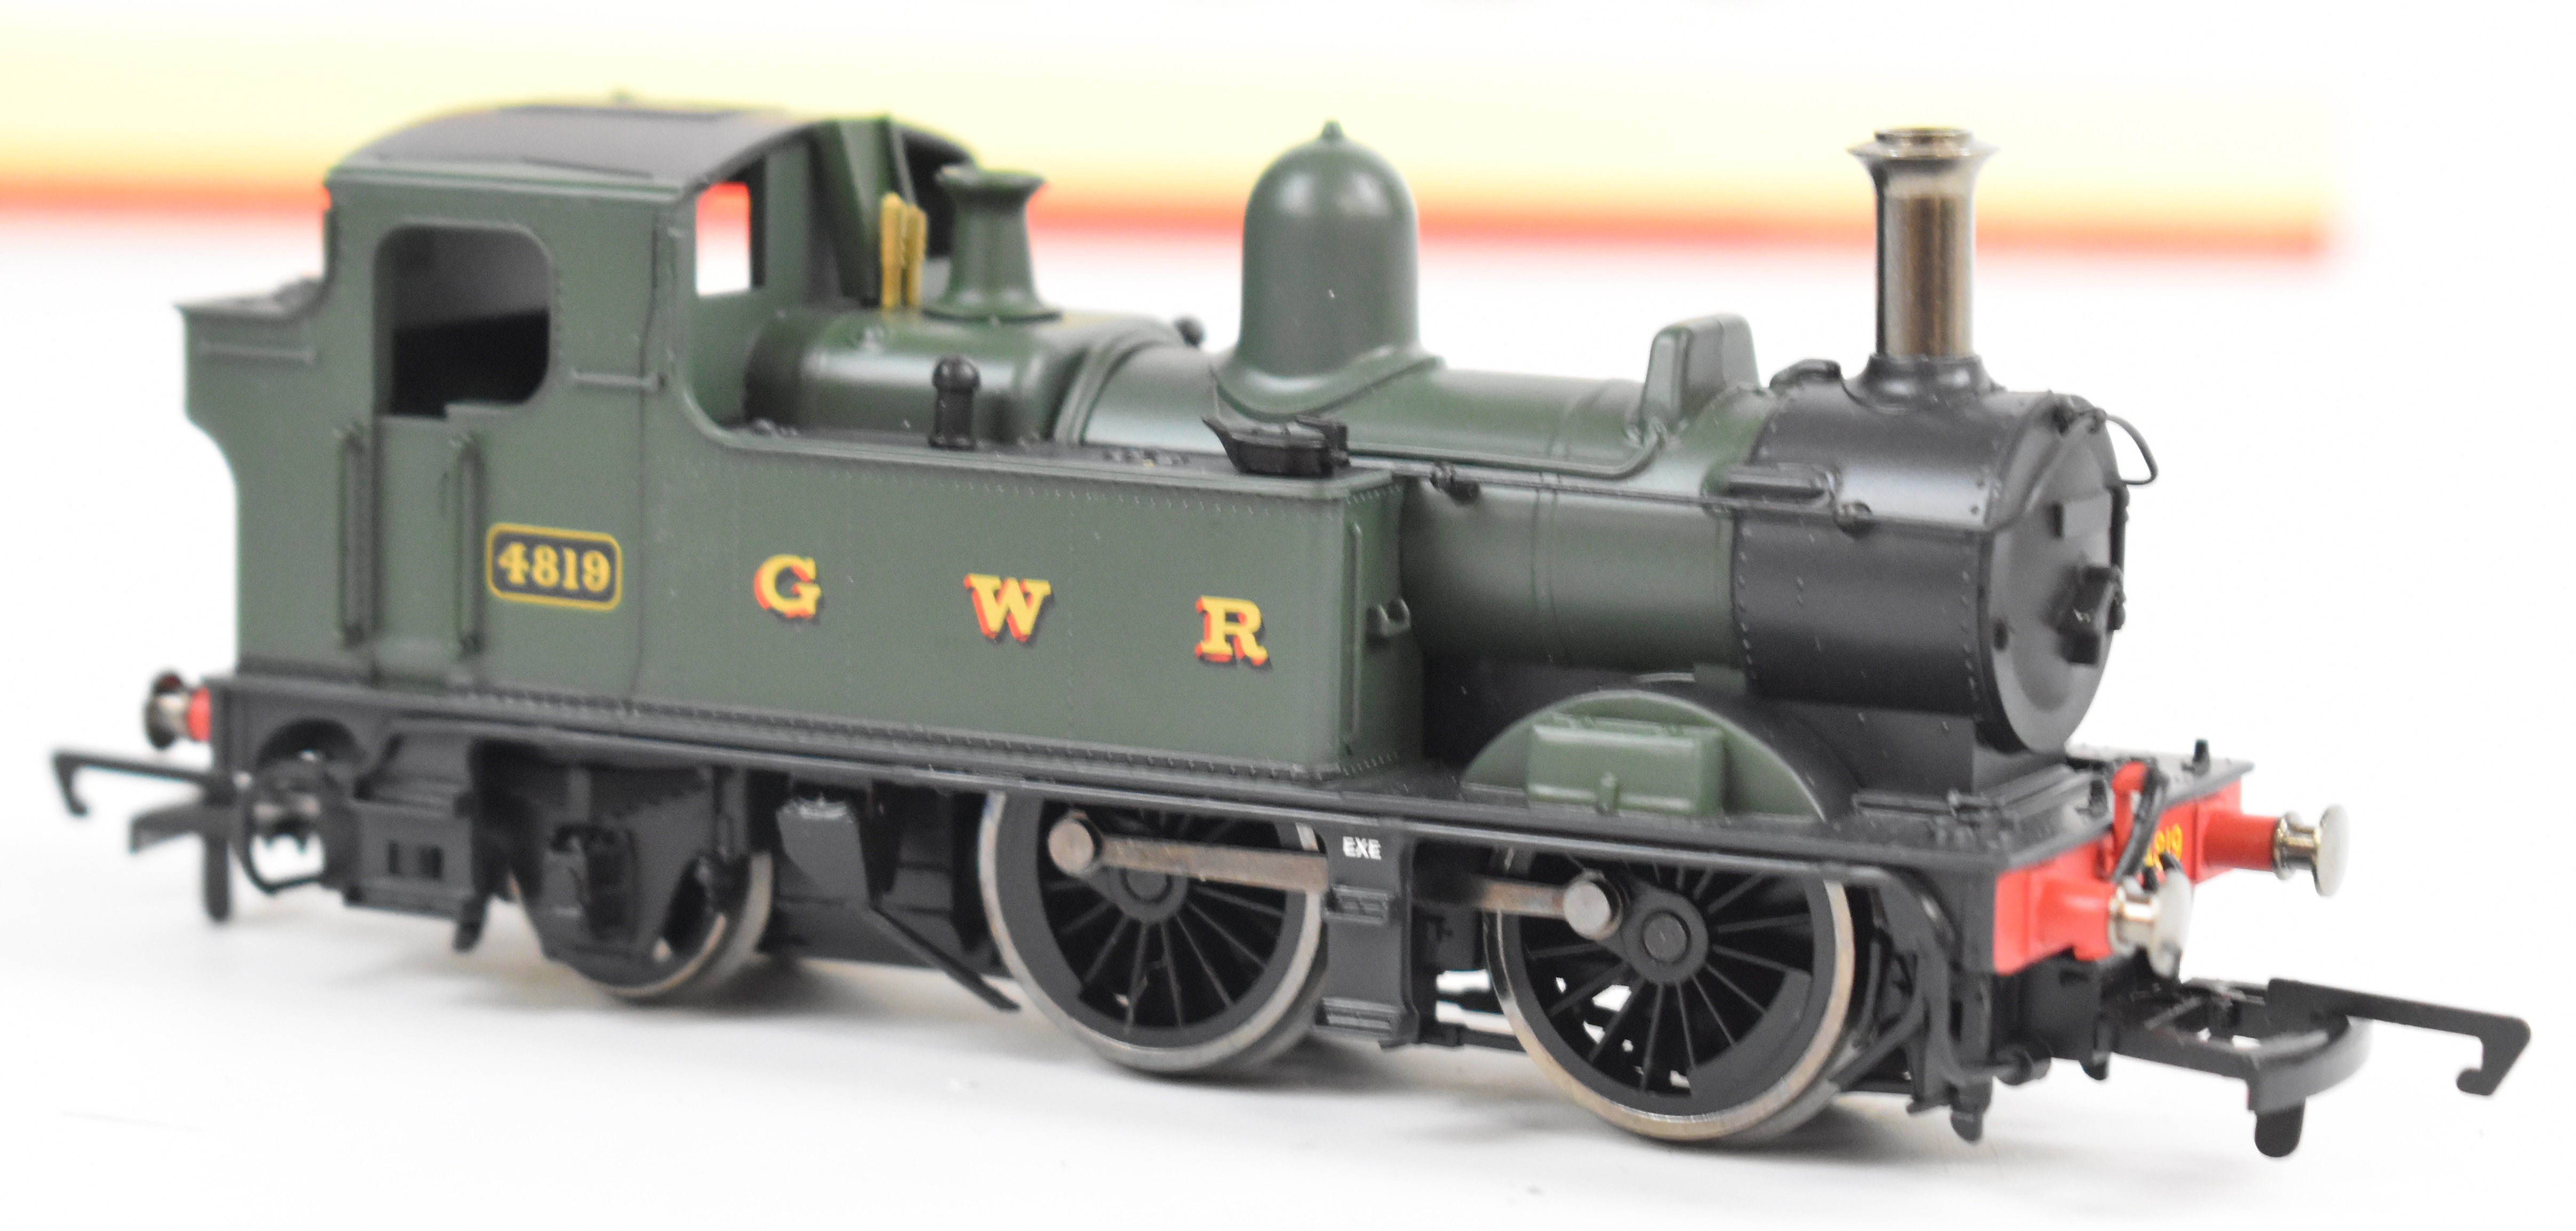 Two Hornby 00 gauge model railway locomotives comprising GWR 0-4-2T Class 14xx '4819' R3117 and - Image 6 of 9